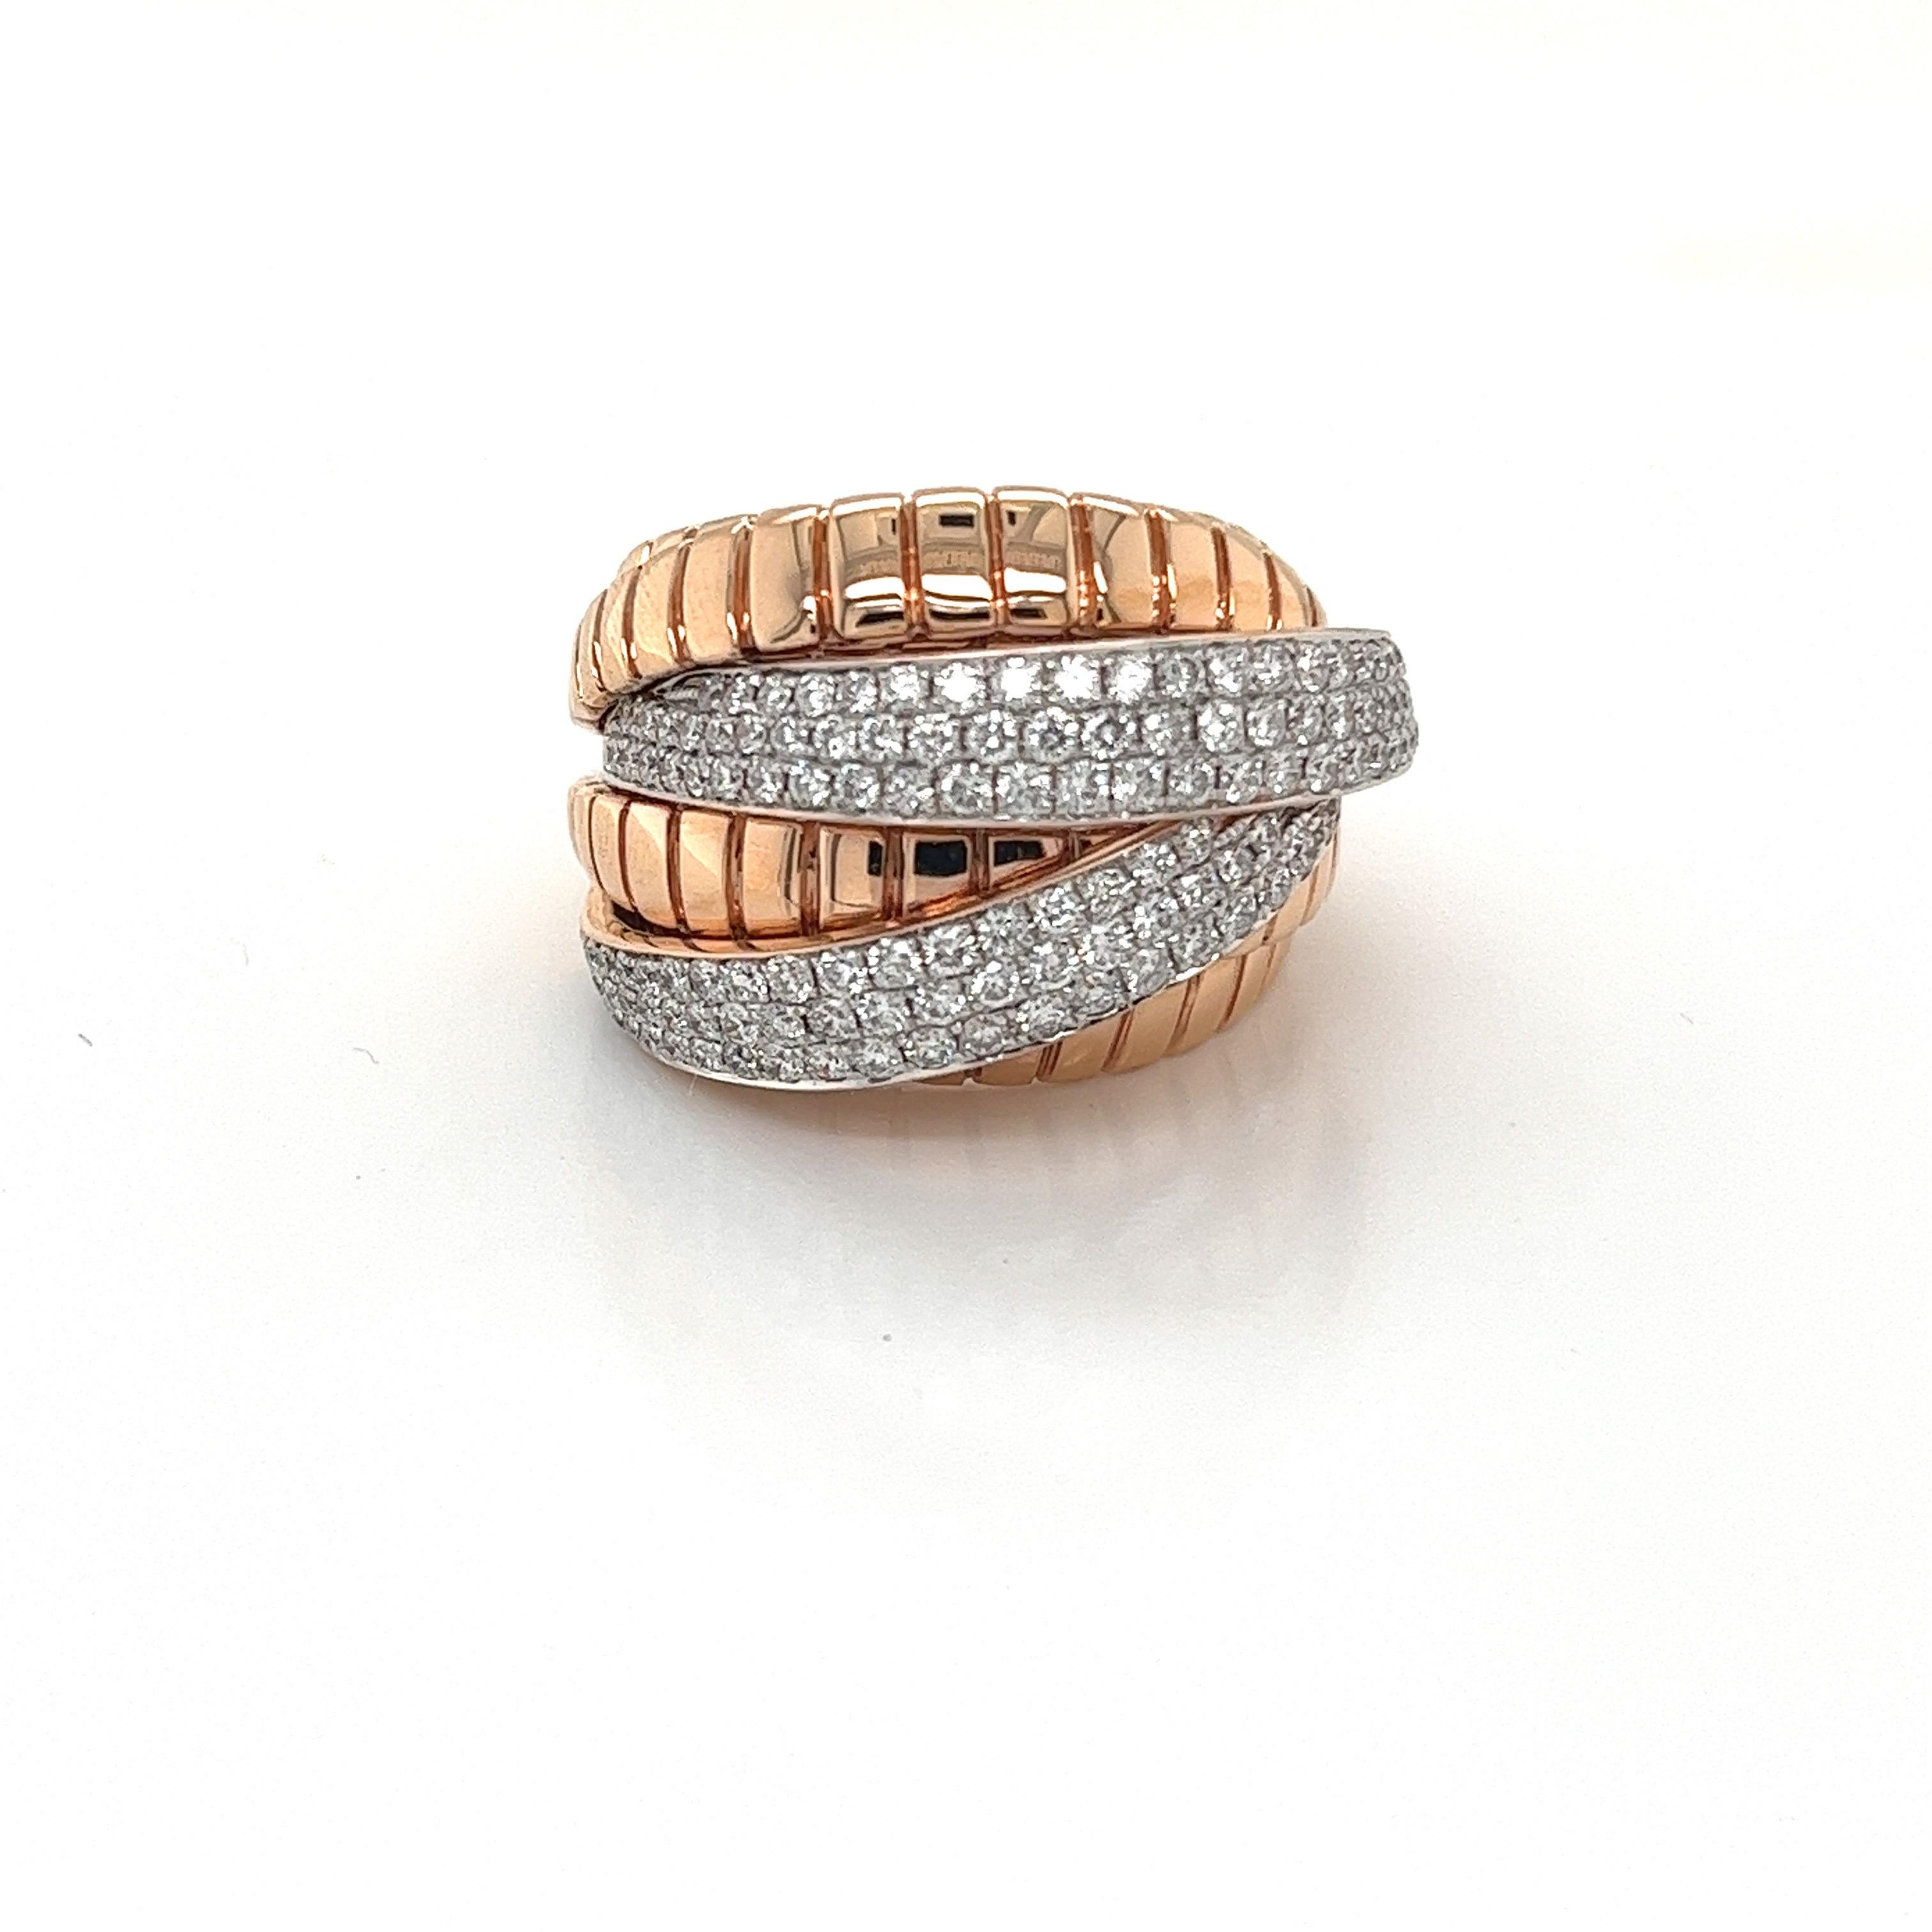 141 Round diamonds weighing 1.23 cts
GH-VS2-SI1
Set in 18k Rose gold
15.36 g